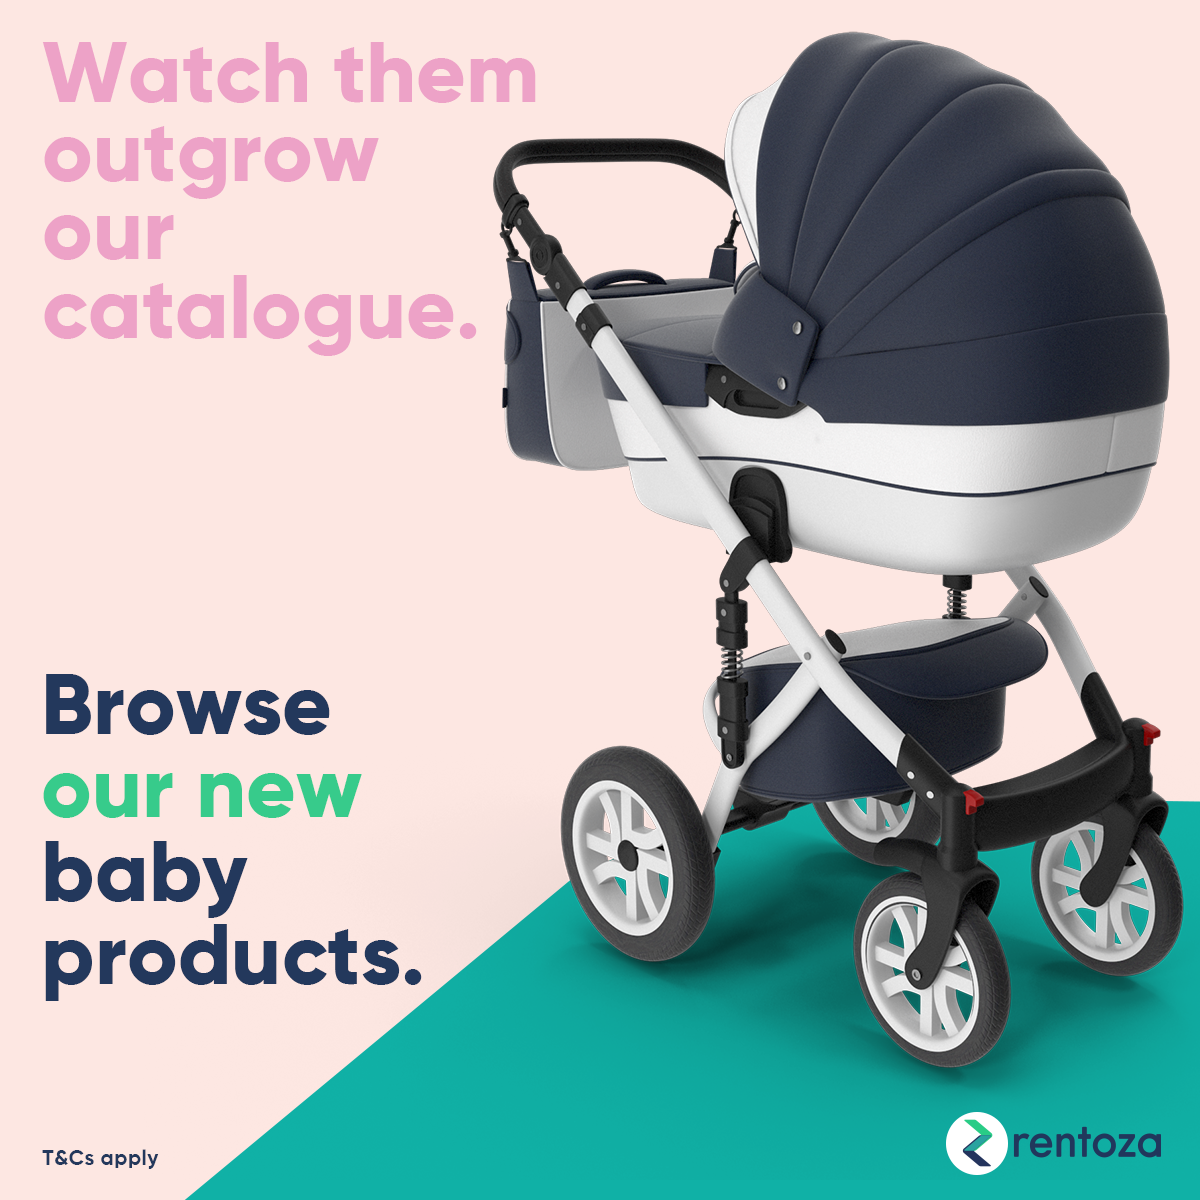 Advertising  baby products